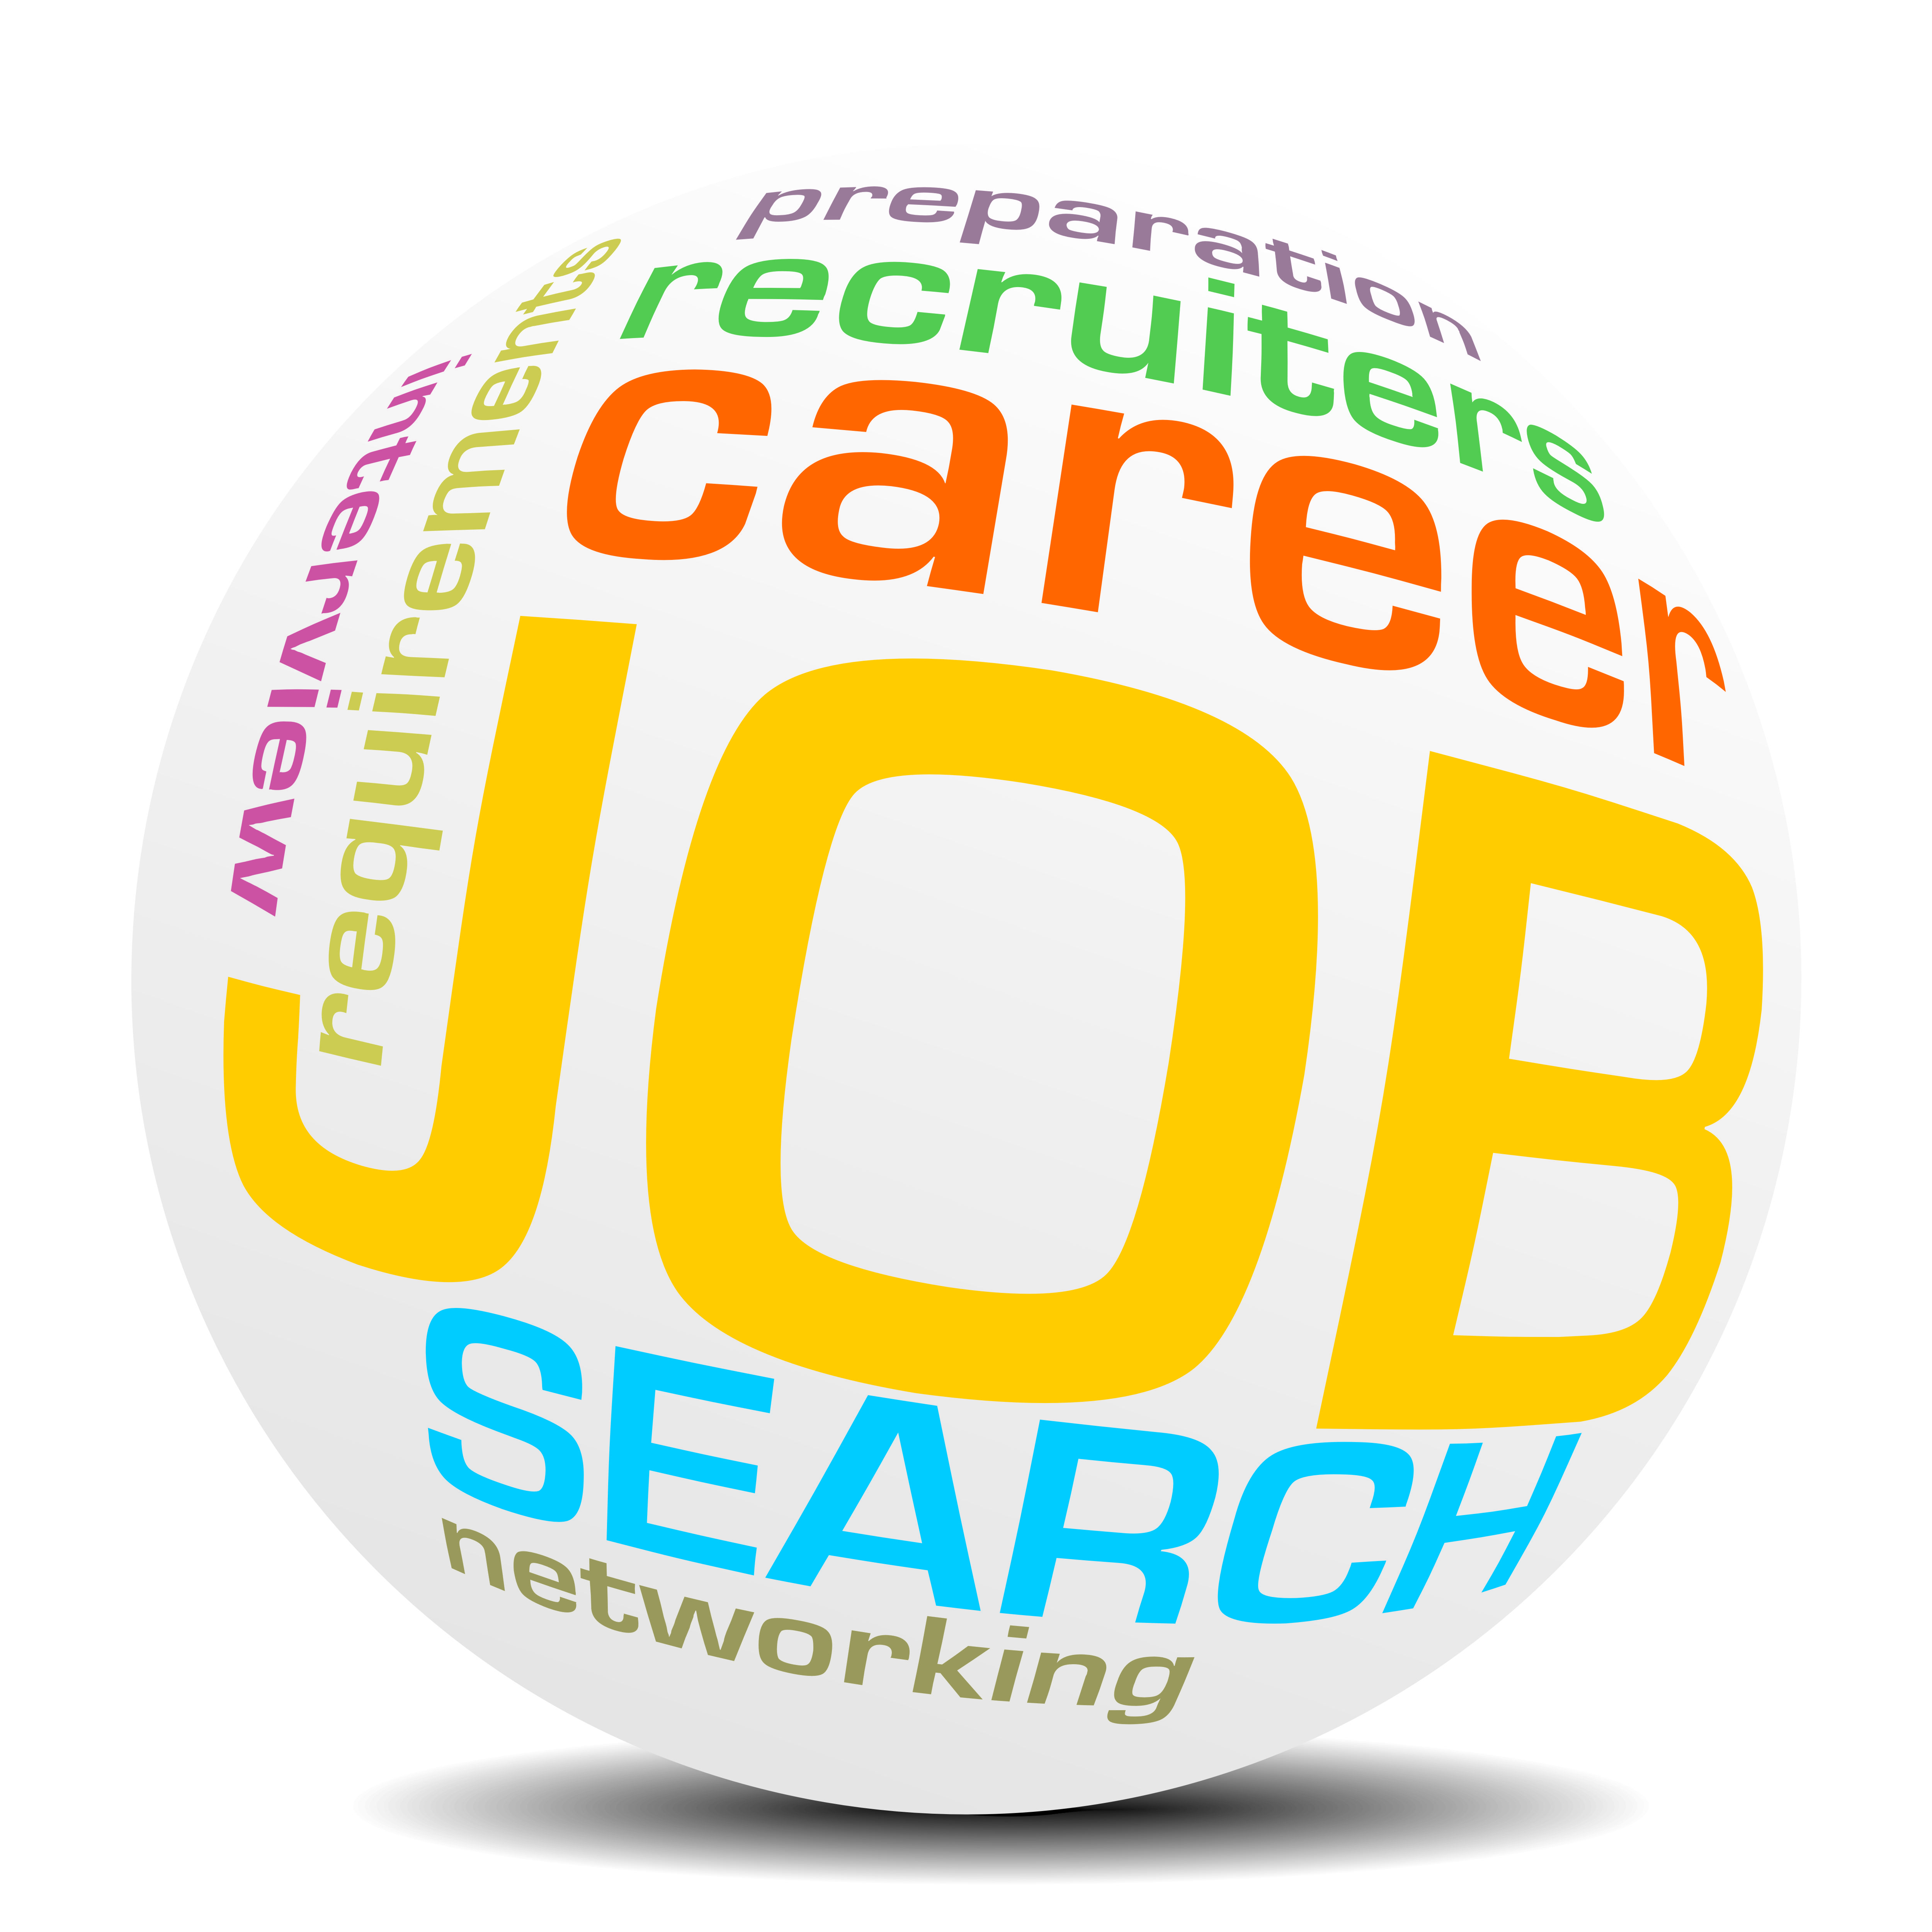 Maximize your job search strategies